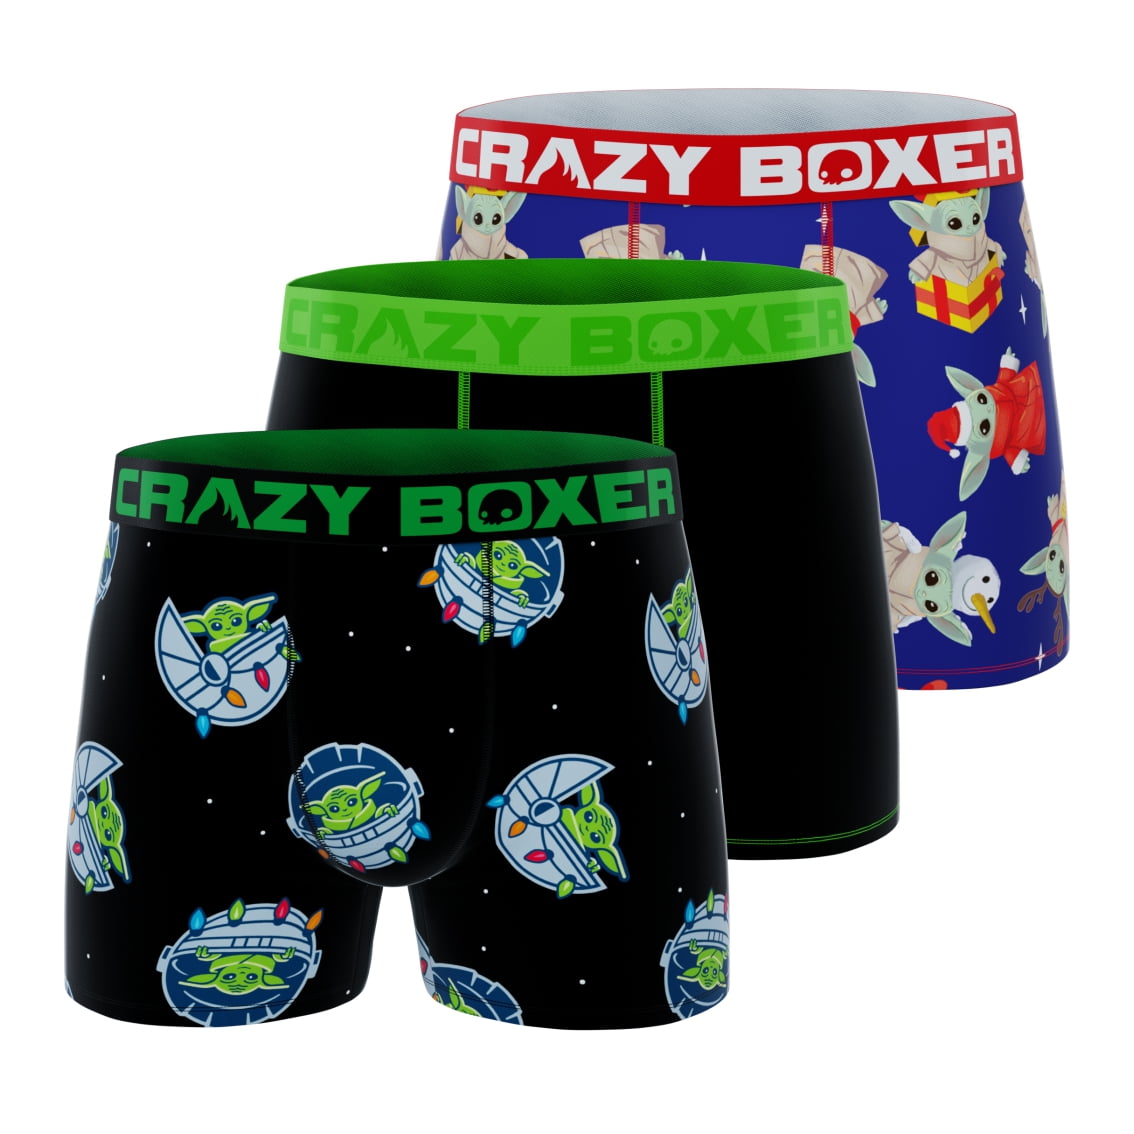 Big sizes knit boxers/ mid briefs 3 colors up to 7X comes 4 per order